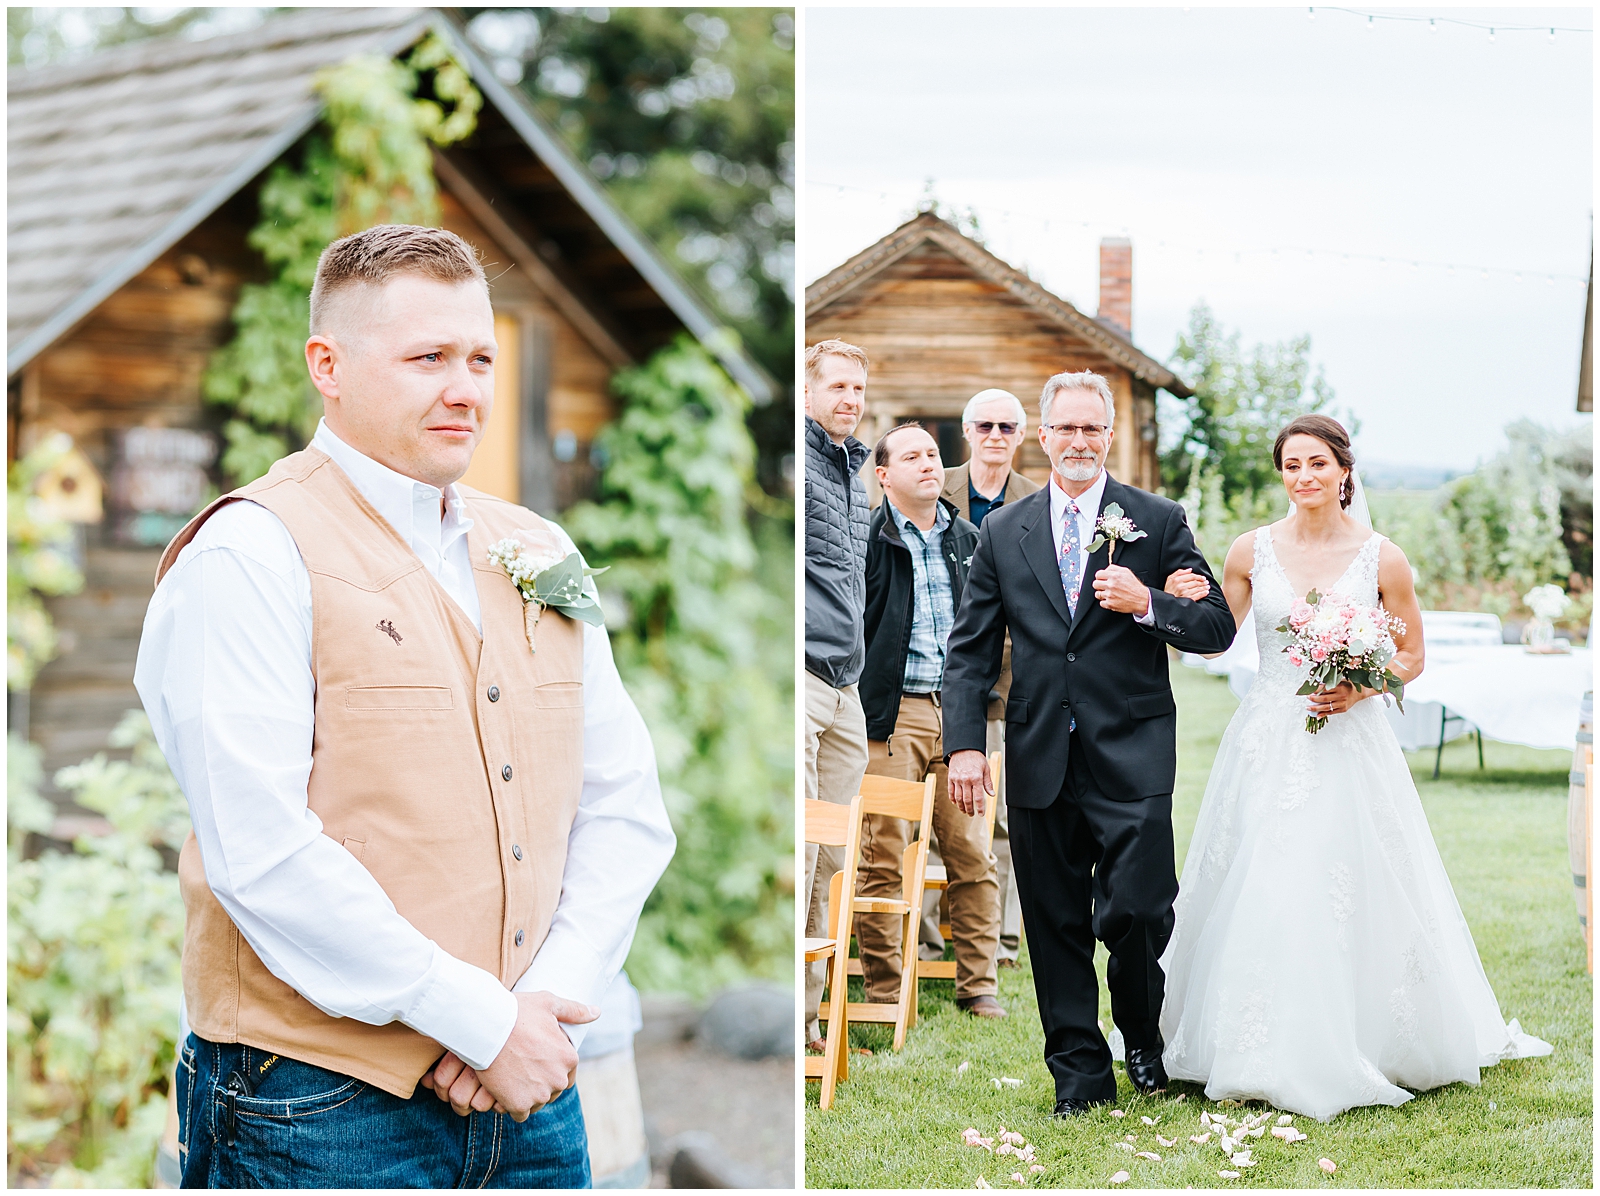 Tearful eyes as the bride comes down the aisle at Rustic Chic Still Water Hollow Wedding